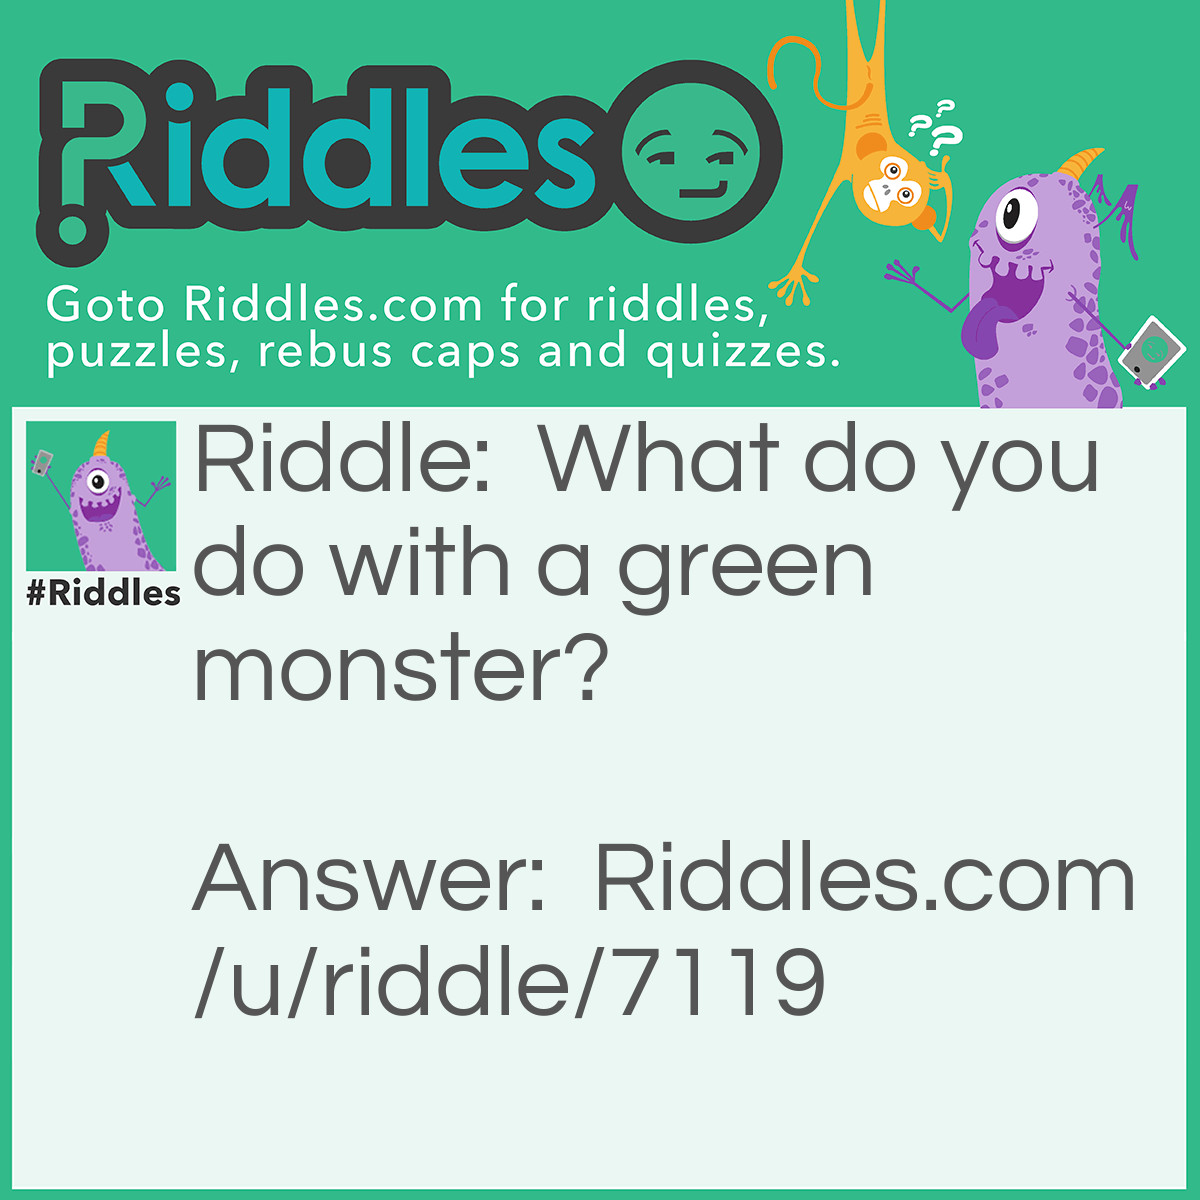 Riddle: What do you do with a green monster? Answer: You let him ripen.